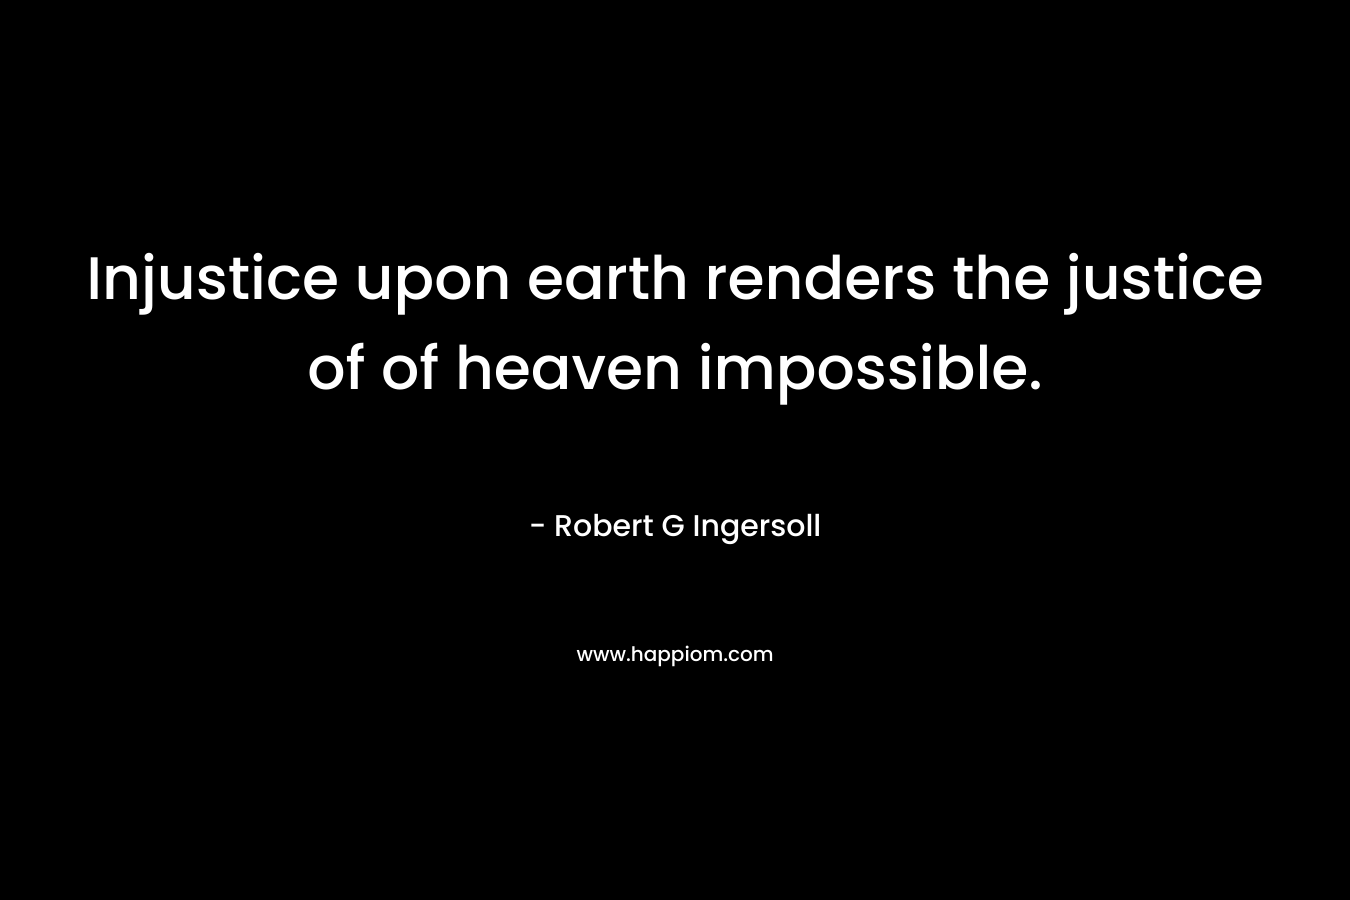 Injustice upon earth renders the justice of of heaven impossible.